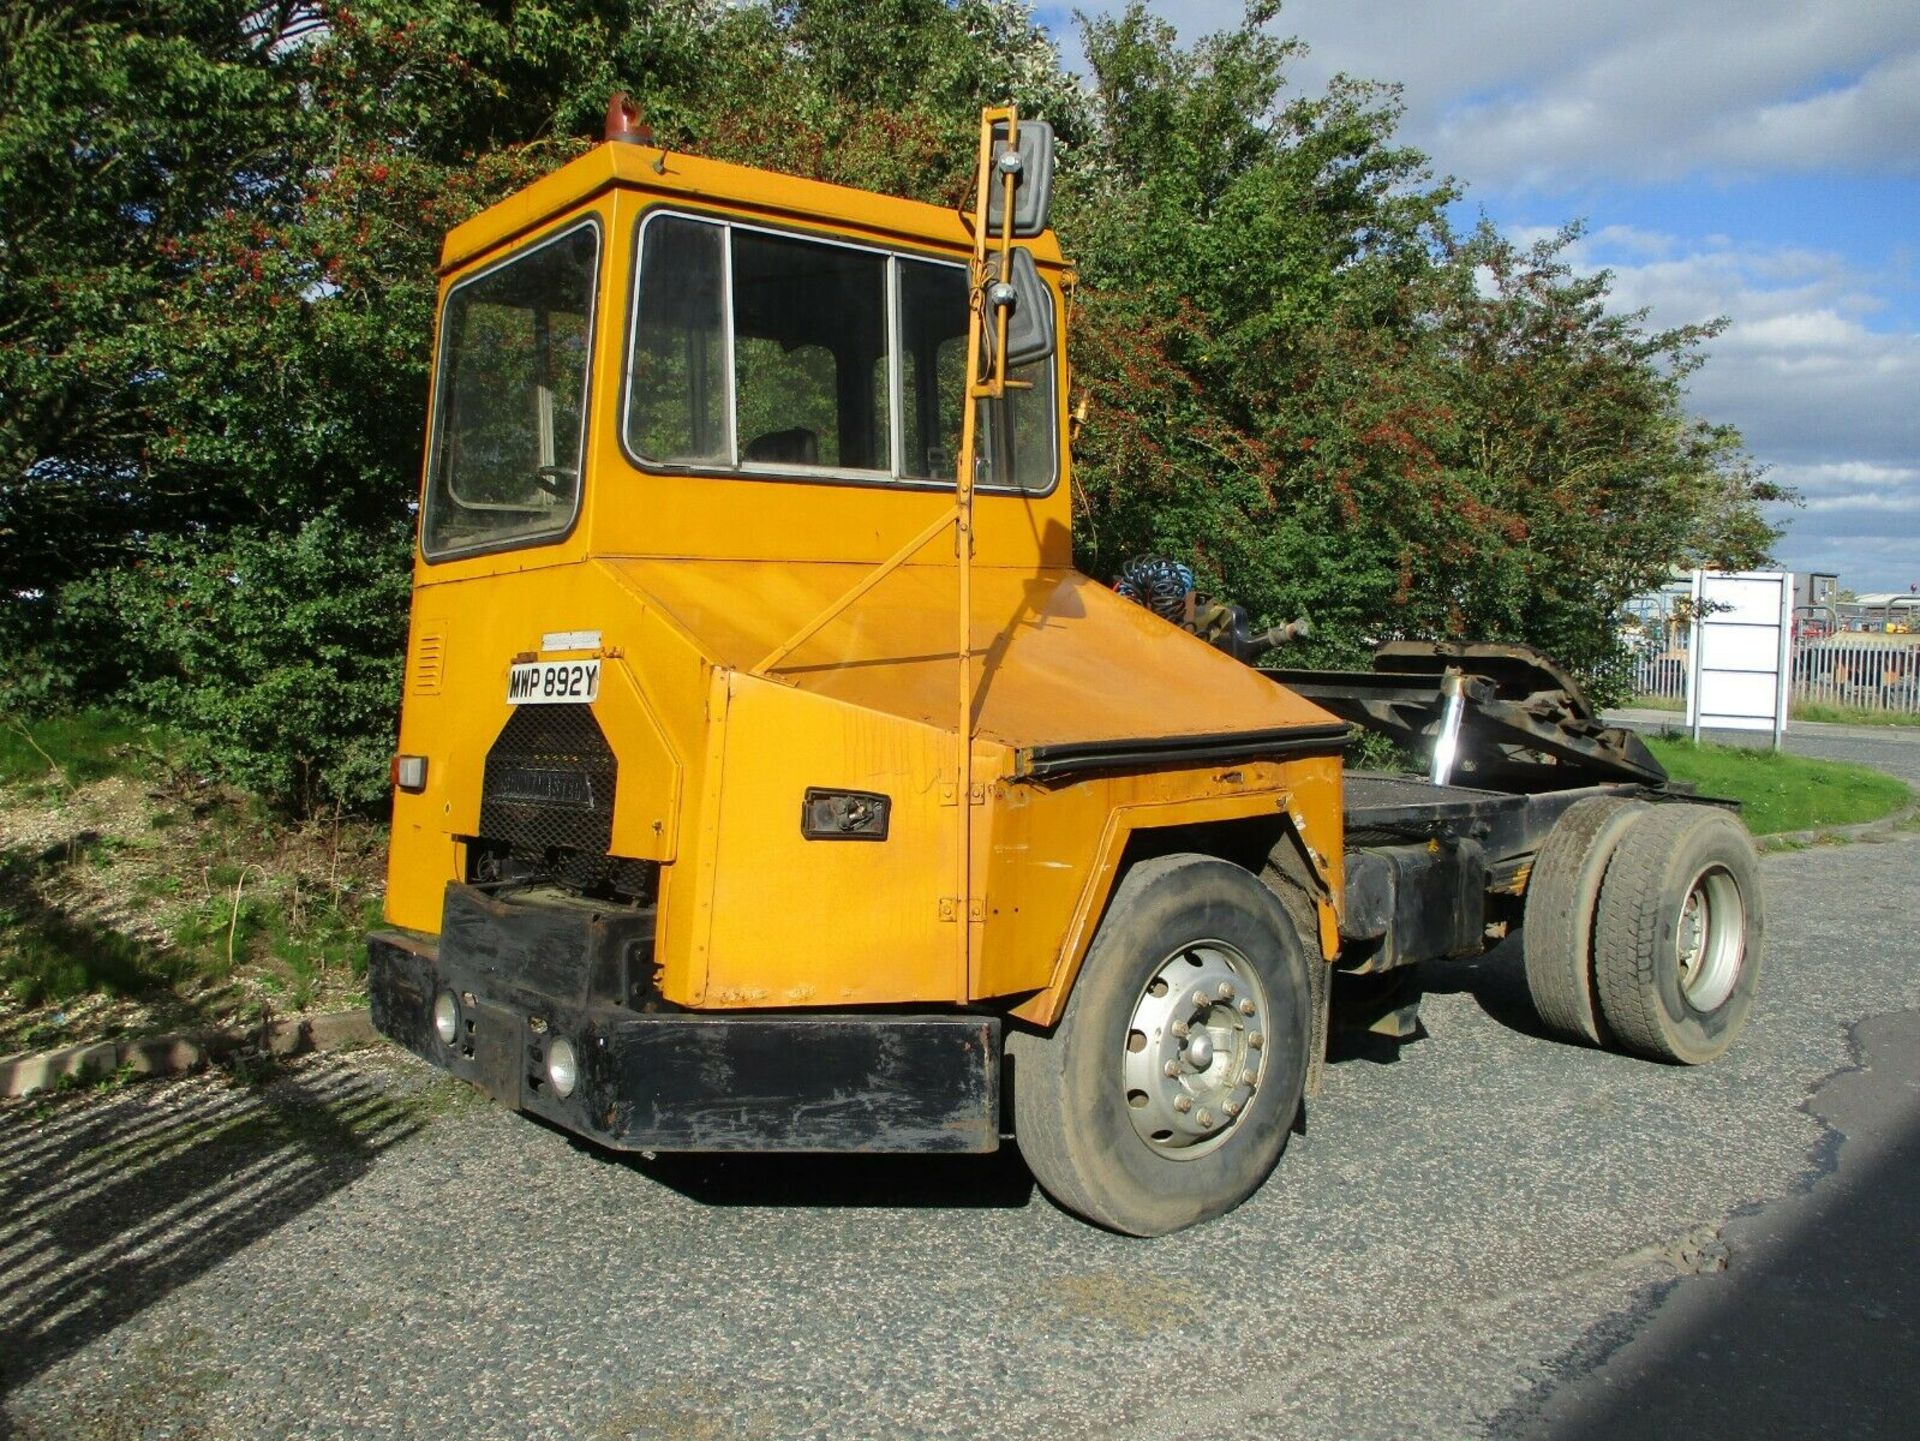 Reliance Dock spotter shunter tow tug tractor unit - Image 7 of 10